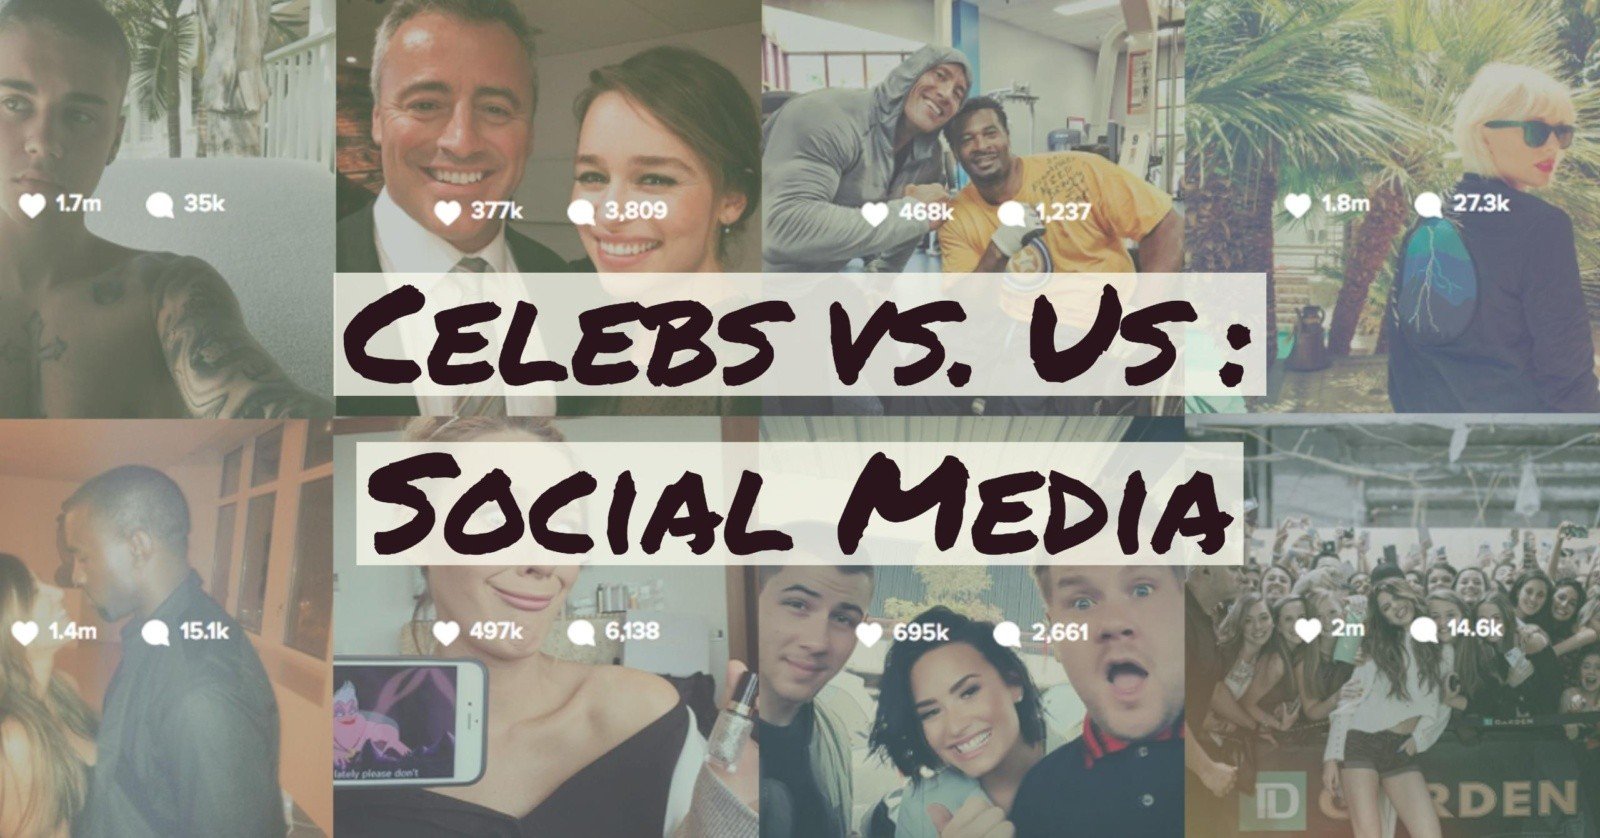 The use of social media by celebrities and public figures